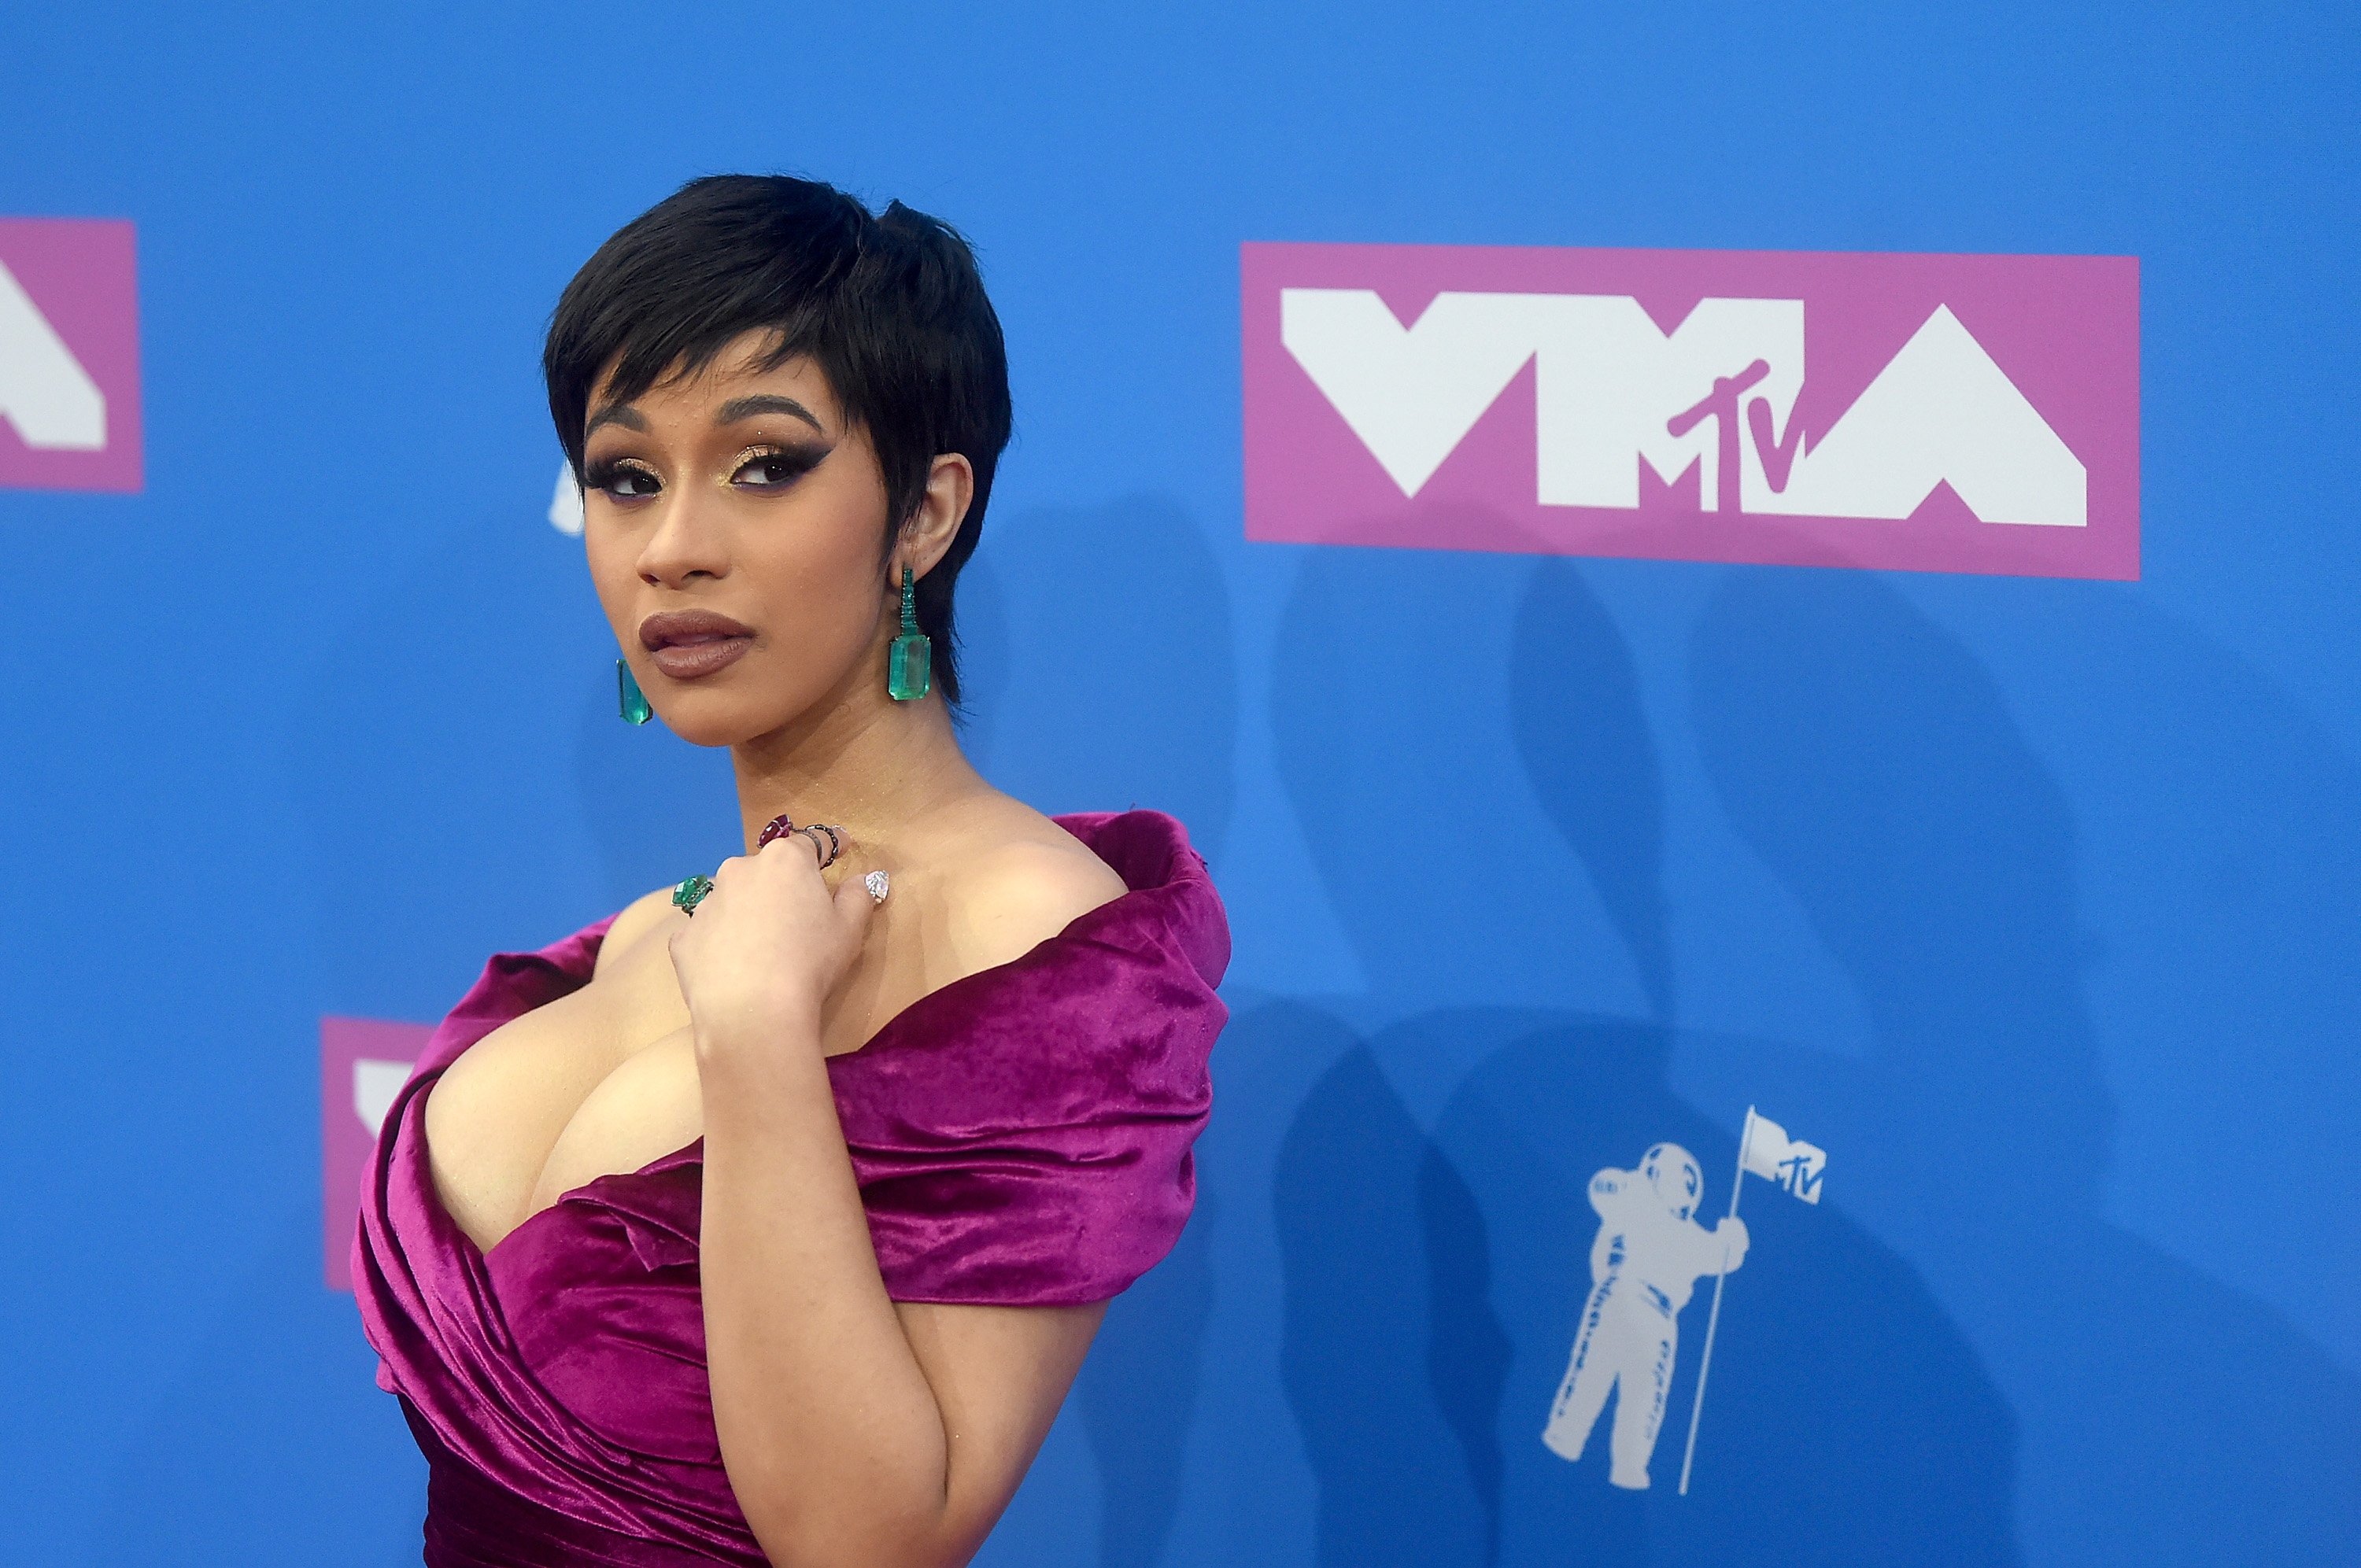 Cardi B poses at the 2018 MTV Video Music Awards on August 20, 2018 in New York City. | Source: Getty Images